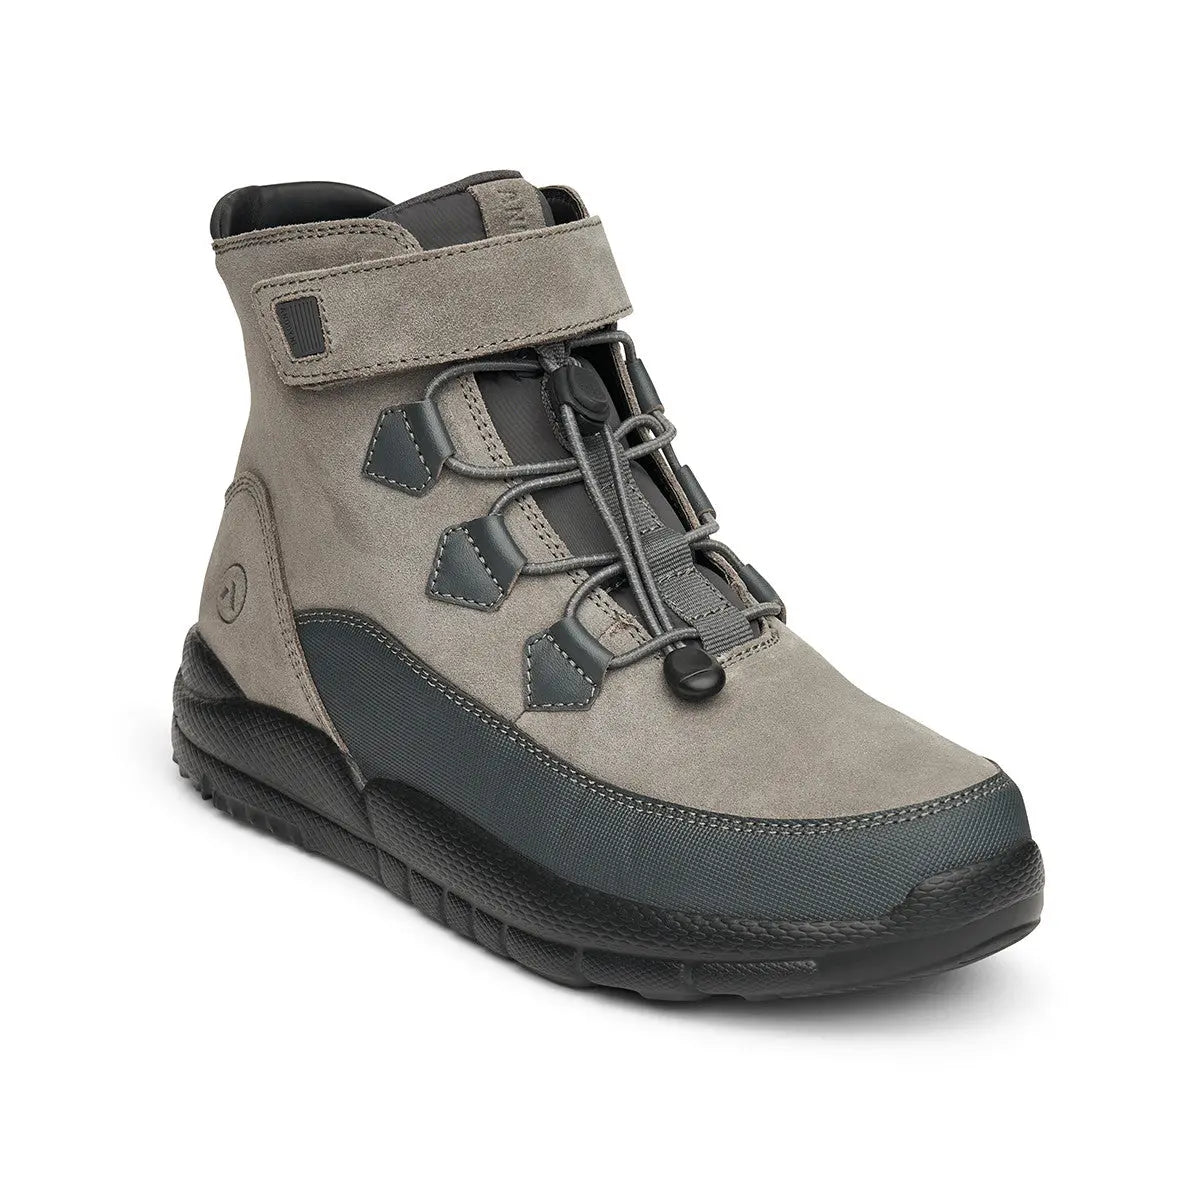 Attractive diabetic footwear boot from Anodyne No.89